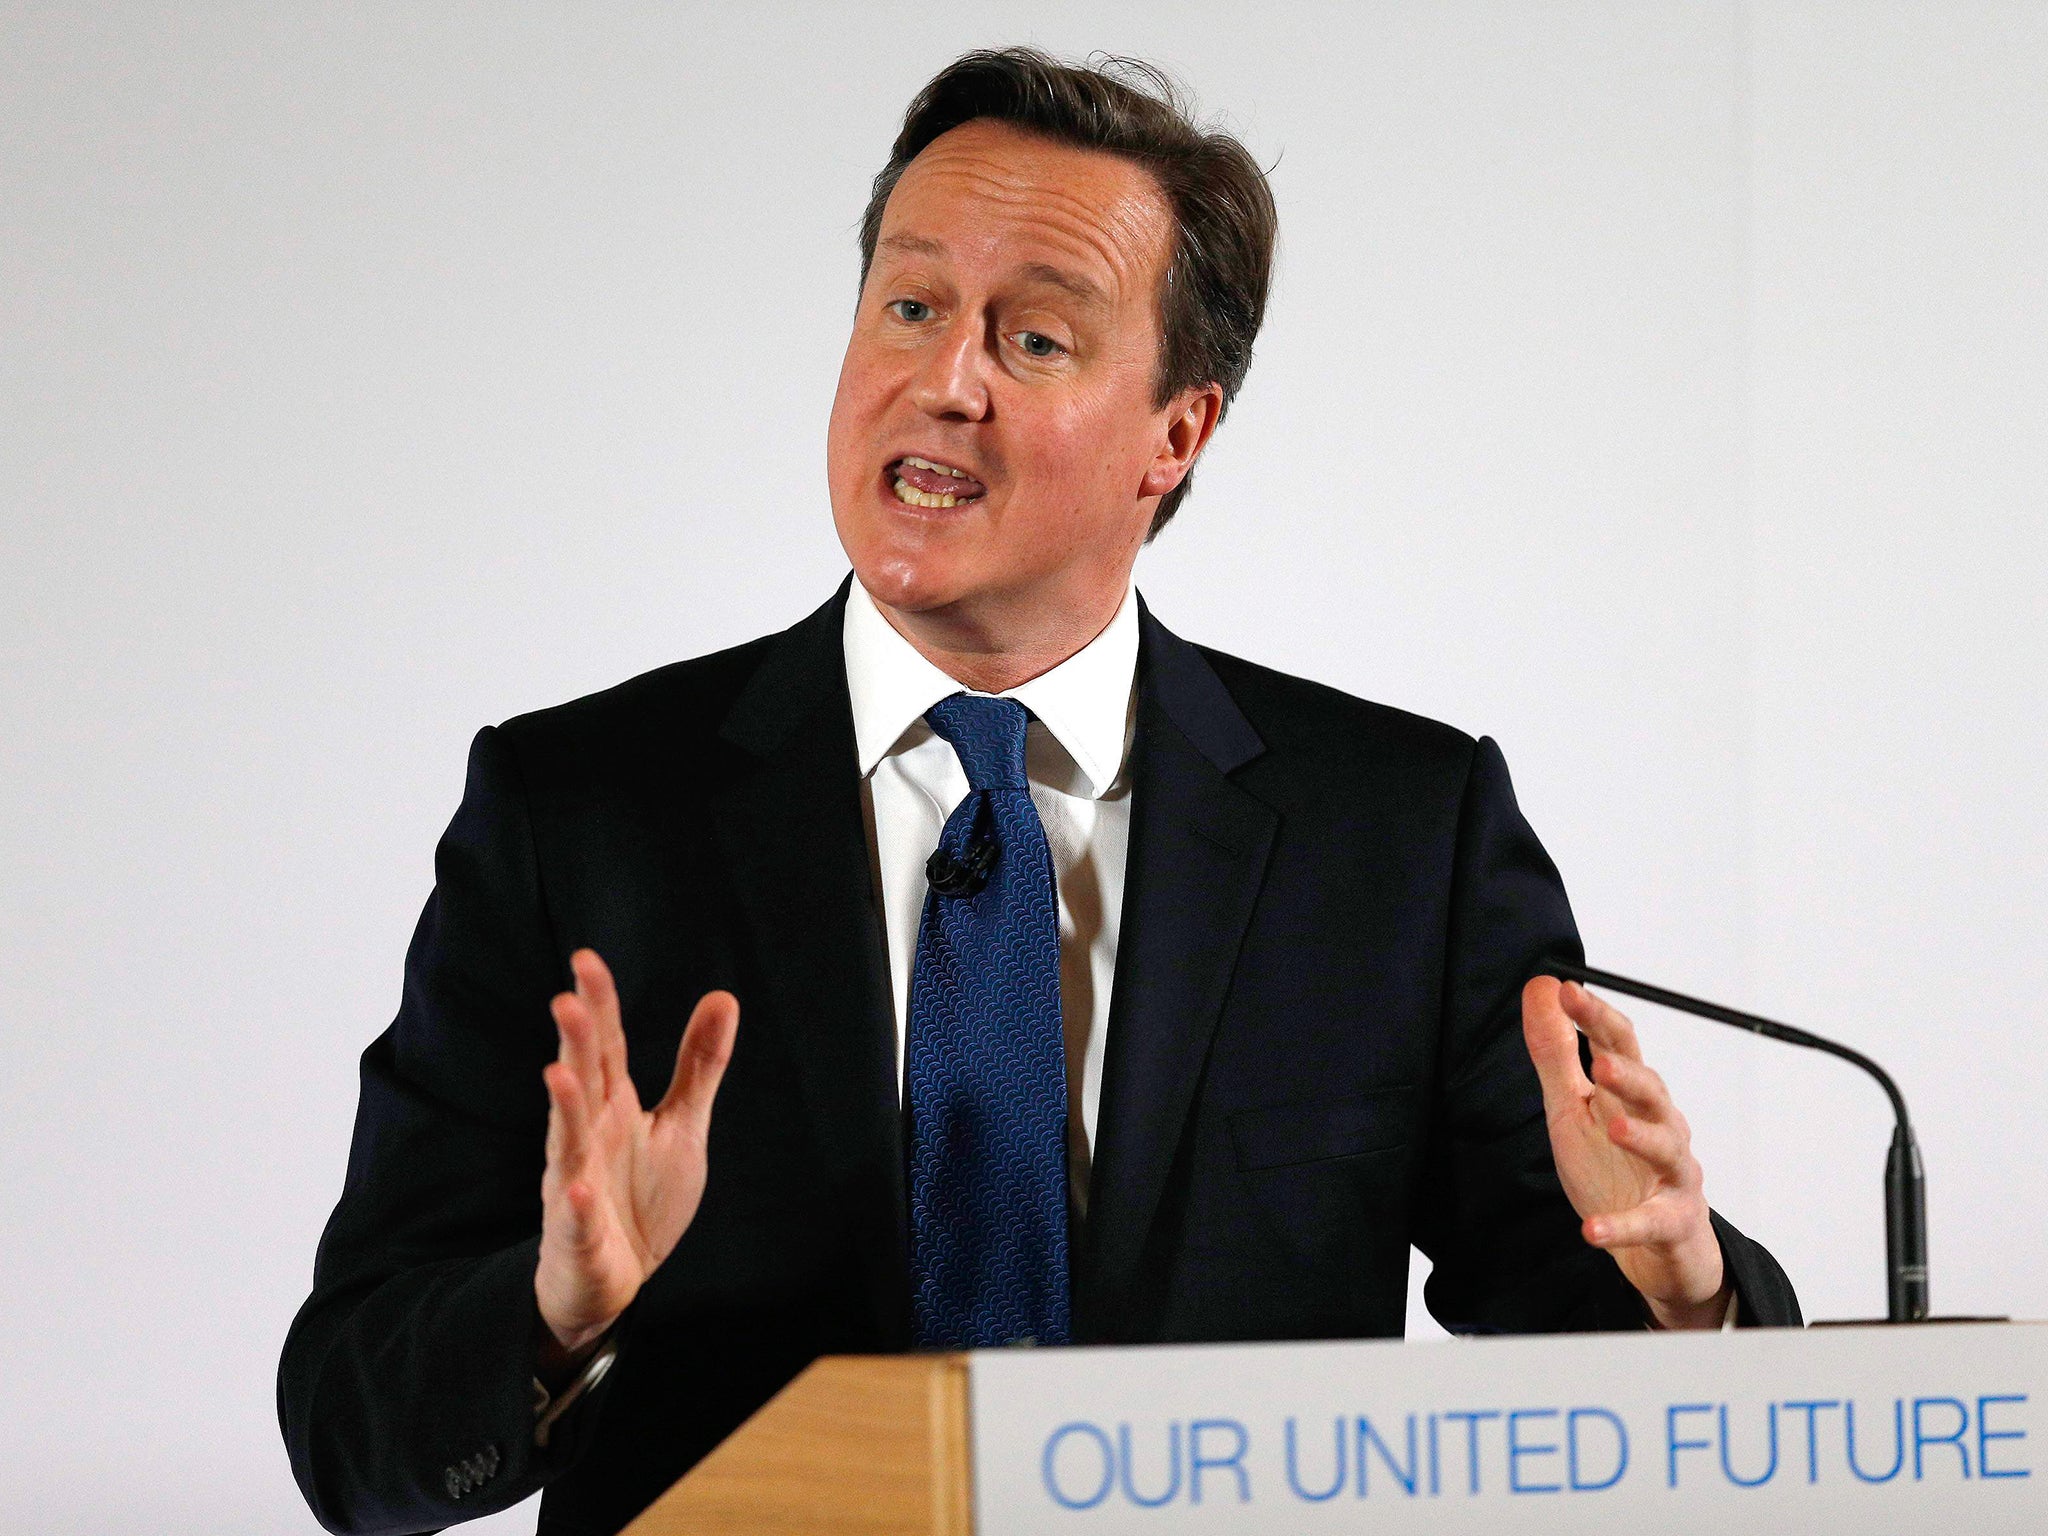 David Cameron said he believed in the 'freedom to hunt'